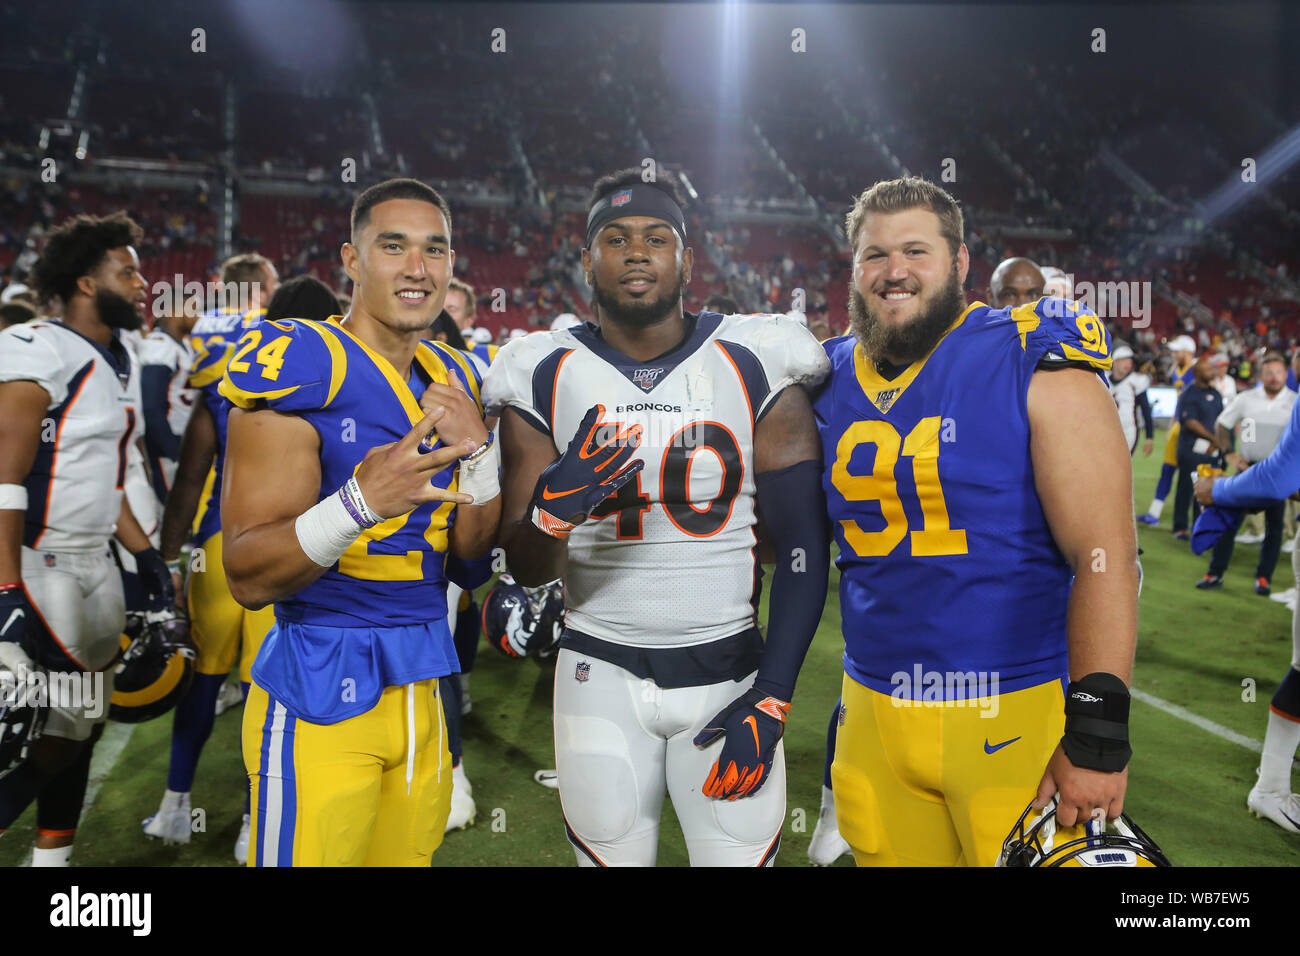 Los Angeles, CA., USA. 24th August, 2019. Los Angeles Rams safety Taylor Rapp #24, Denver Broncos linebacker Keishawn Bierria #40, and Los Angeles Rams defensive tackle Greg Gaines #91 after the NFL game between Denver Broncos vs Los Angeles Rams at the Los Angeles Memorial Coliseum in Los Angeles, Ca on August 24, 2019. Jevone Moore Credit: Cal Sport Media/Alamy Live News Stock Photo